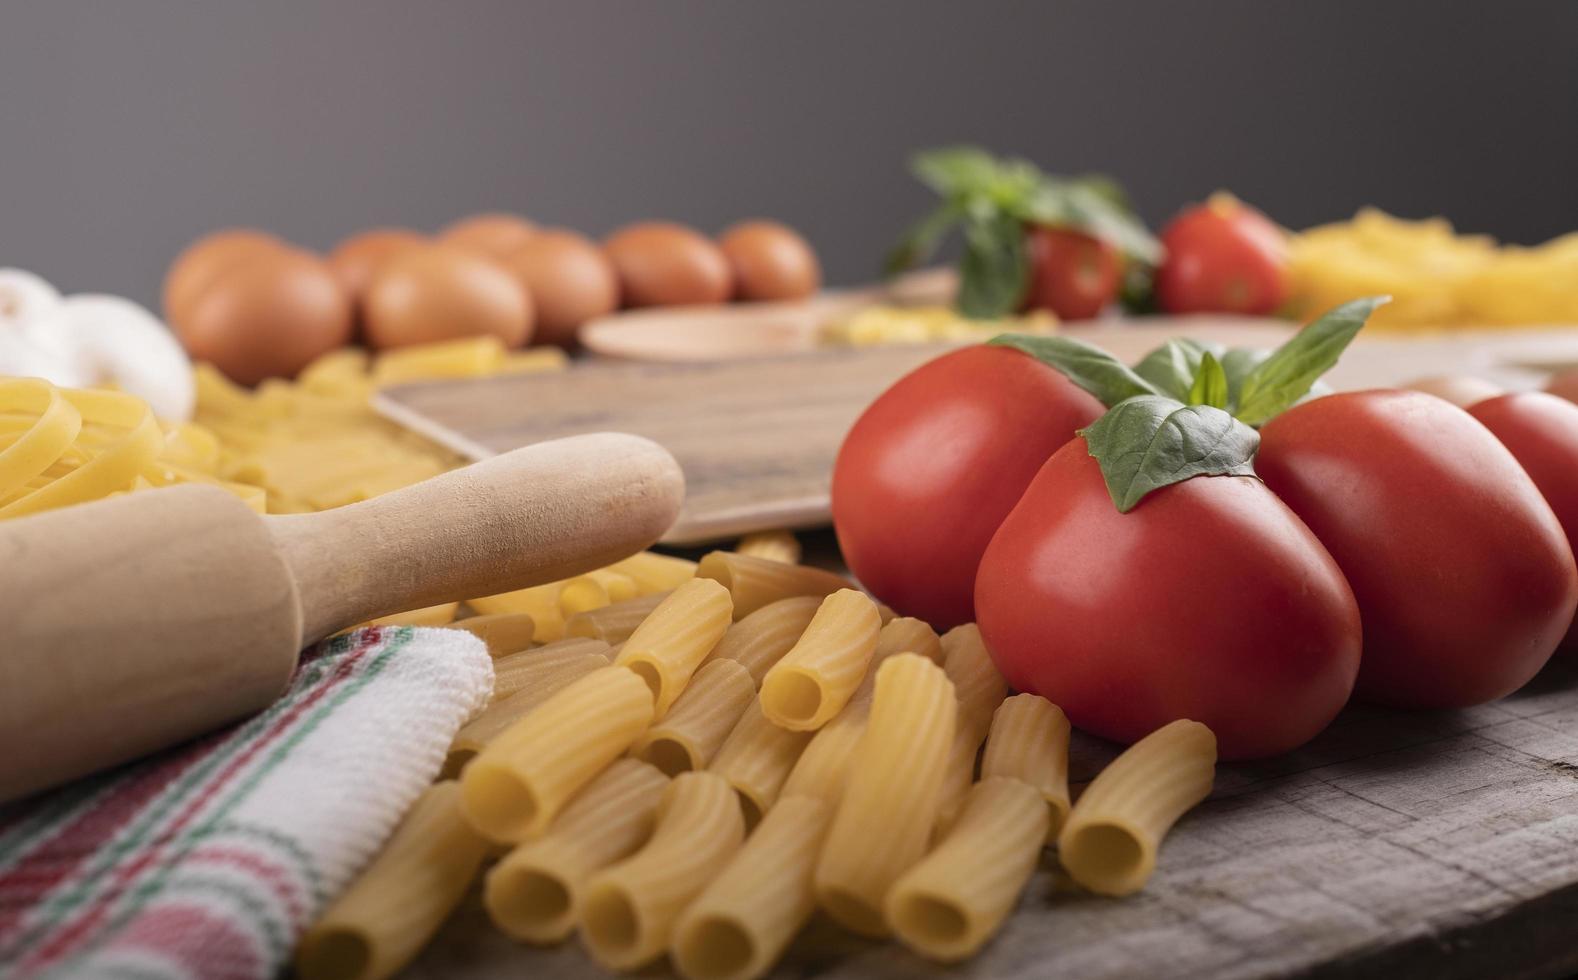 pasta, tomatoes and ingredients for italian restaurant with wooden kneader photo